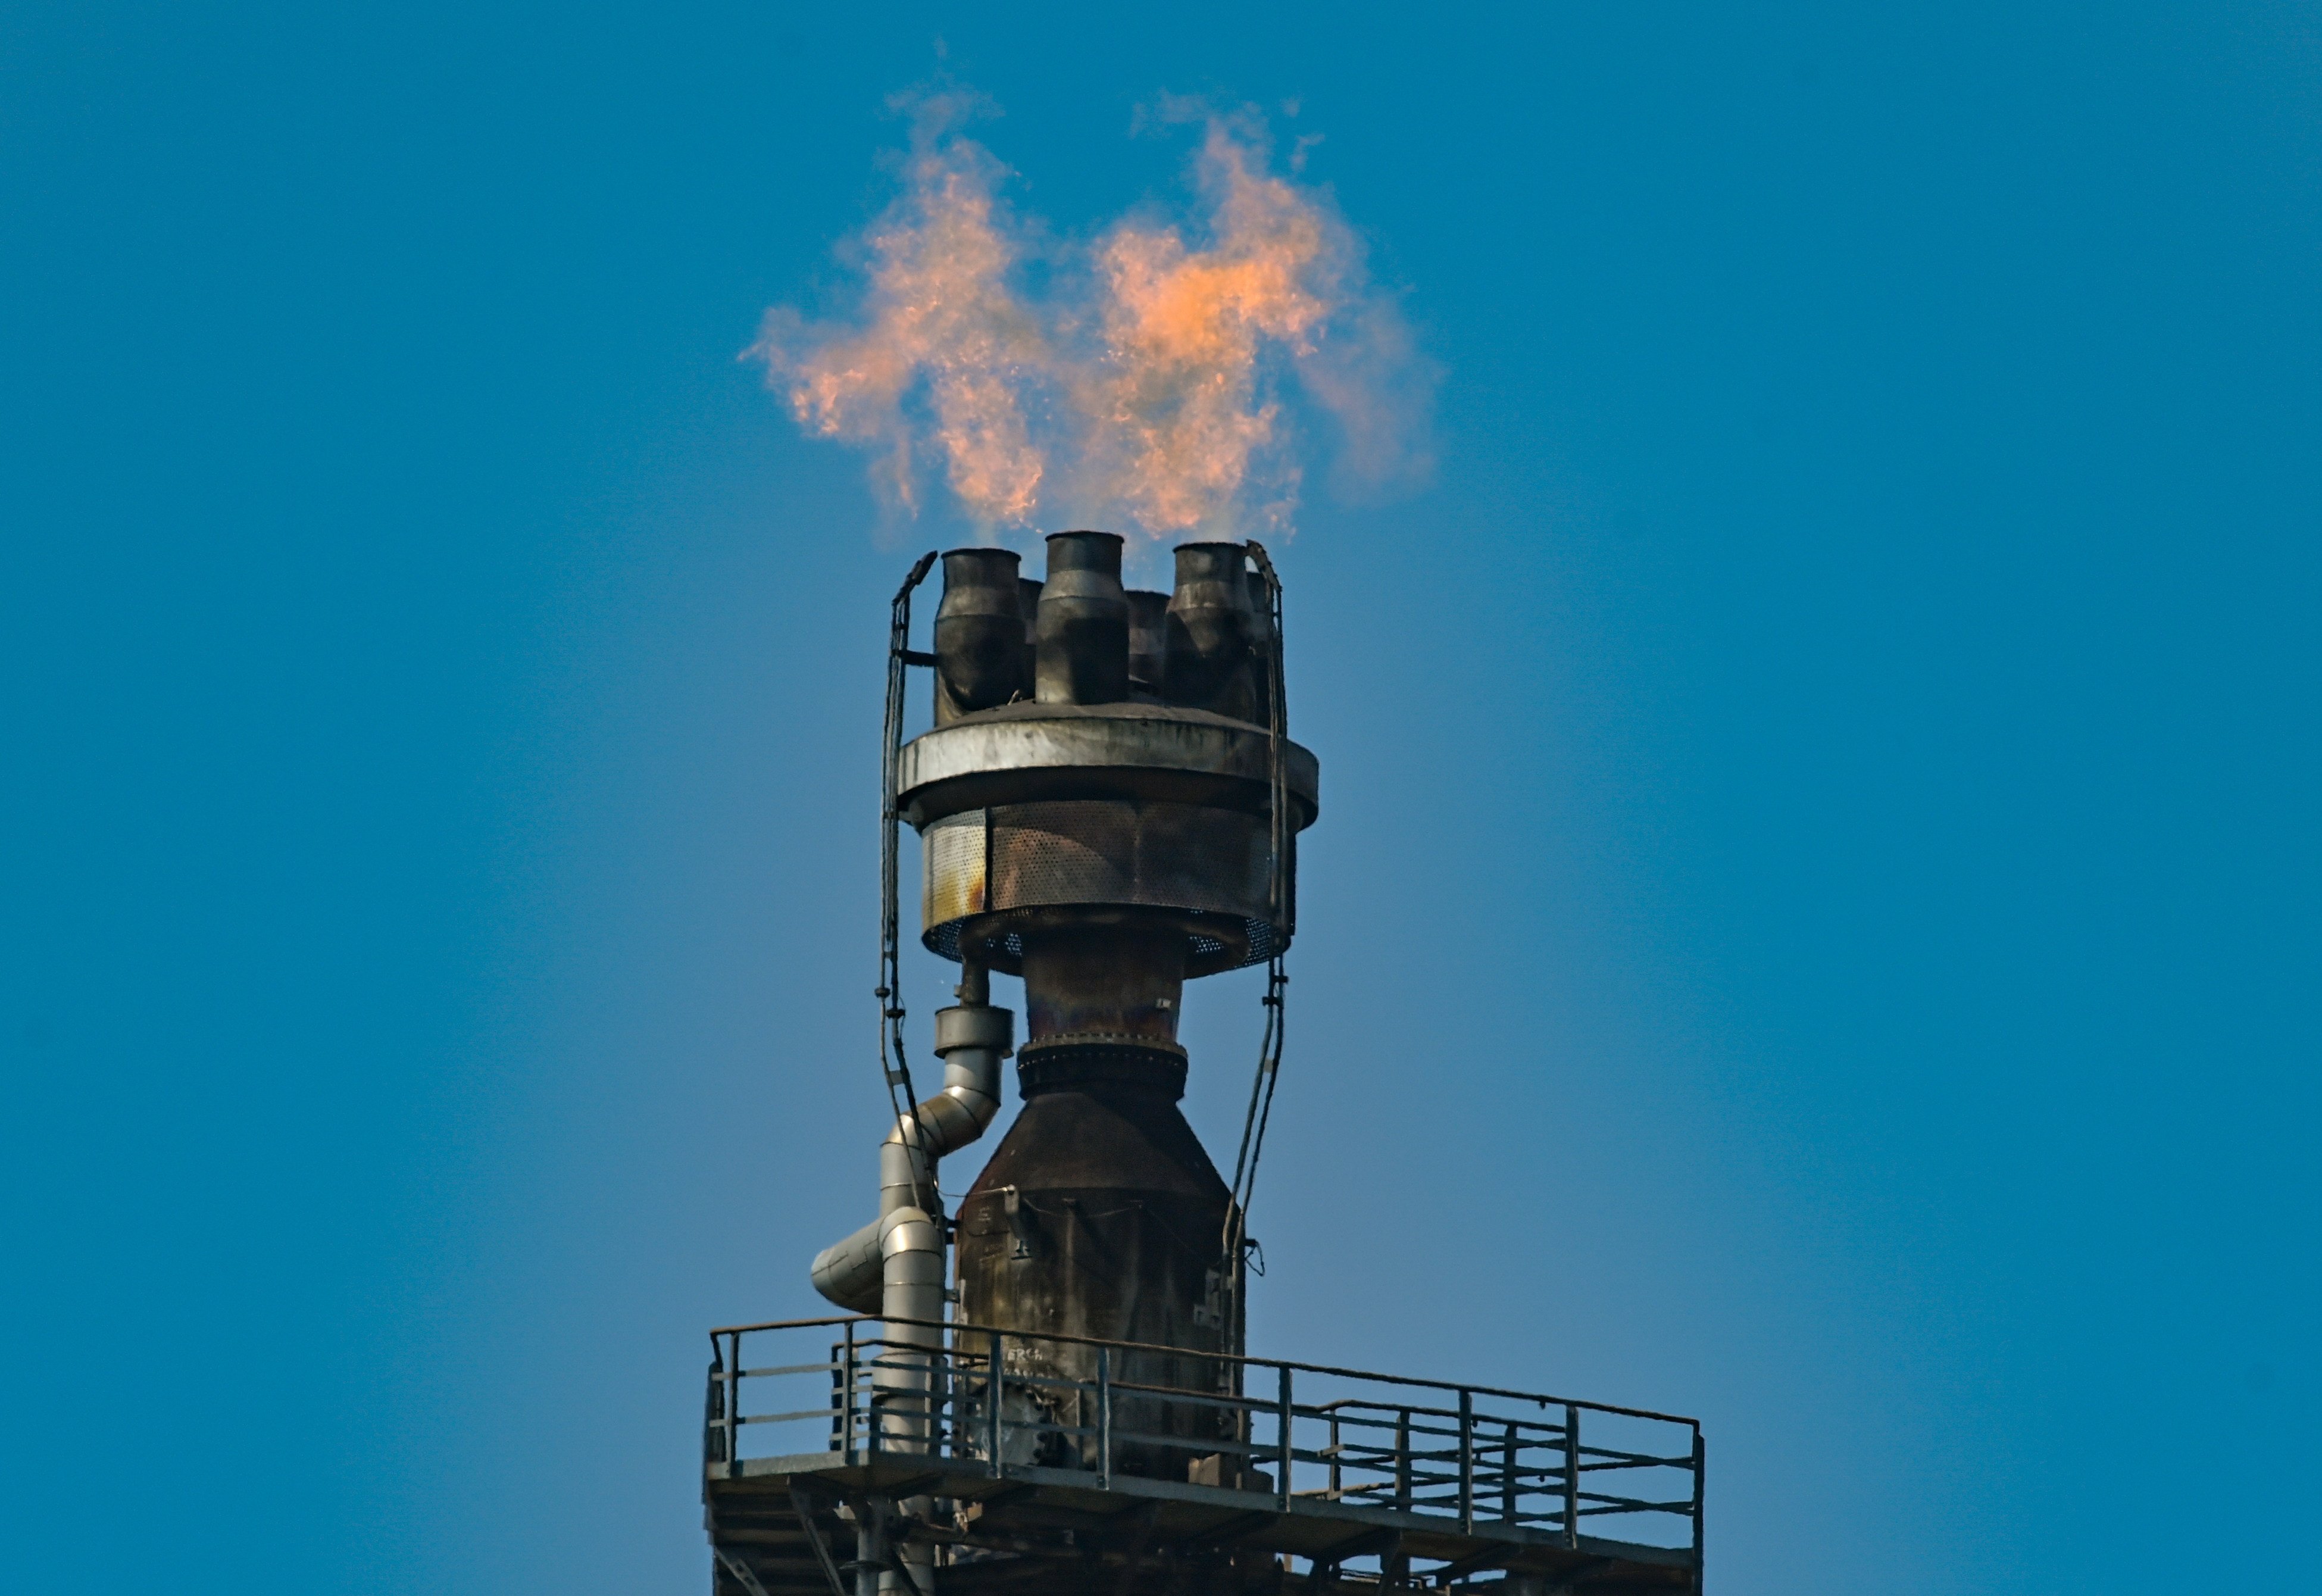 Surplus gas burns at the PCK Petroleum Refinery in Brandenburg, Schwedt, Germany on May 2. Last year, Rosneft took over a large part of the refinery which processes 12 million tonnes of crude oil annually, making it one of the largest processing sites in Germany. Photo: dpa